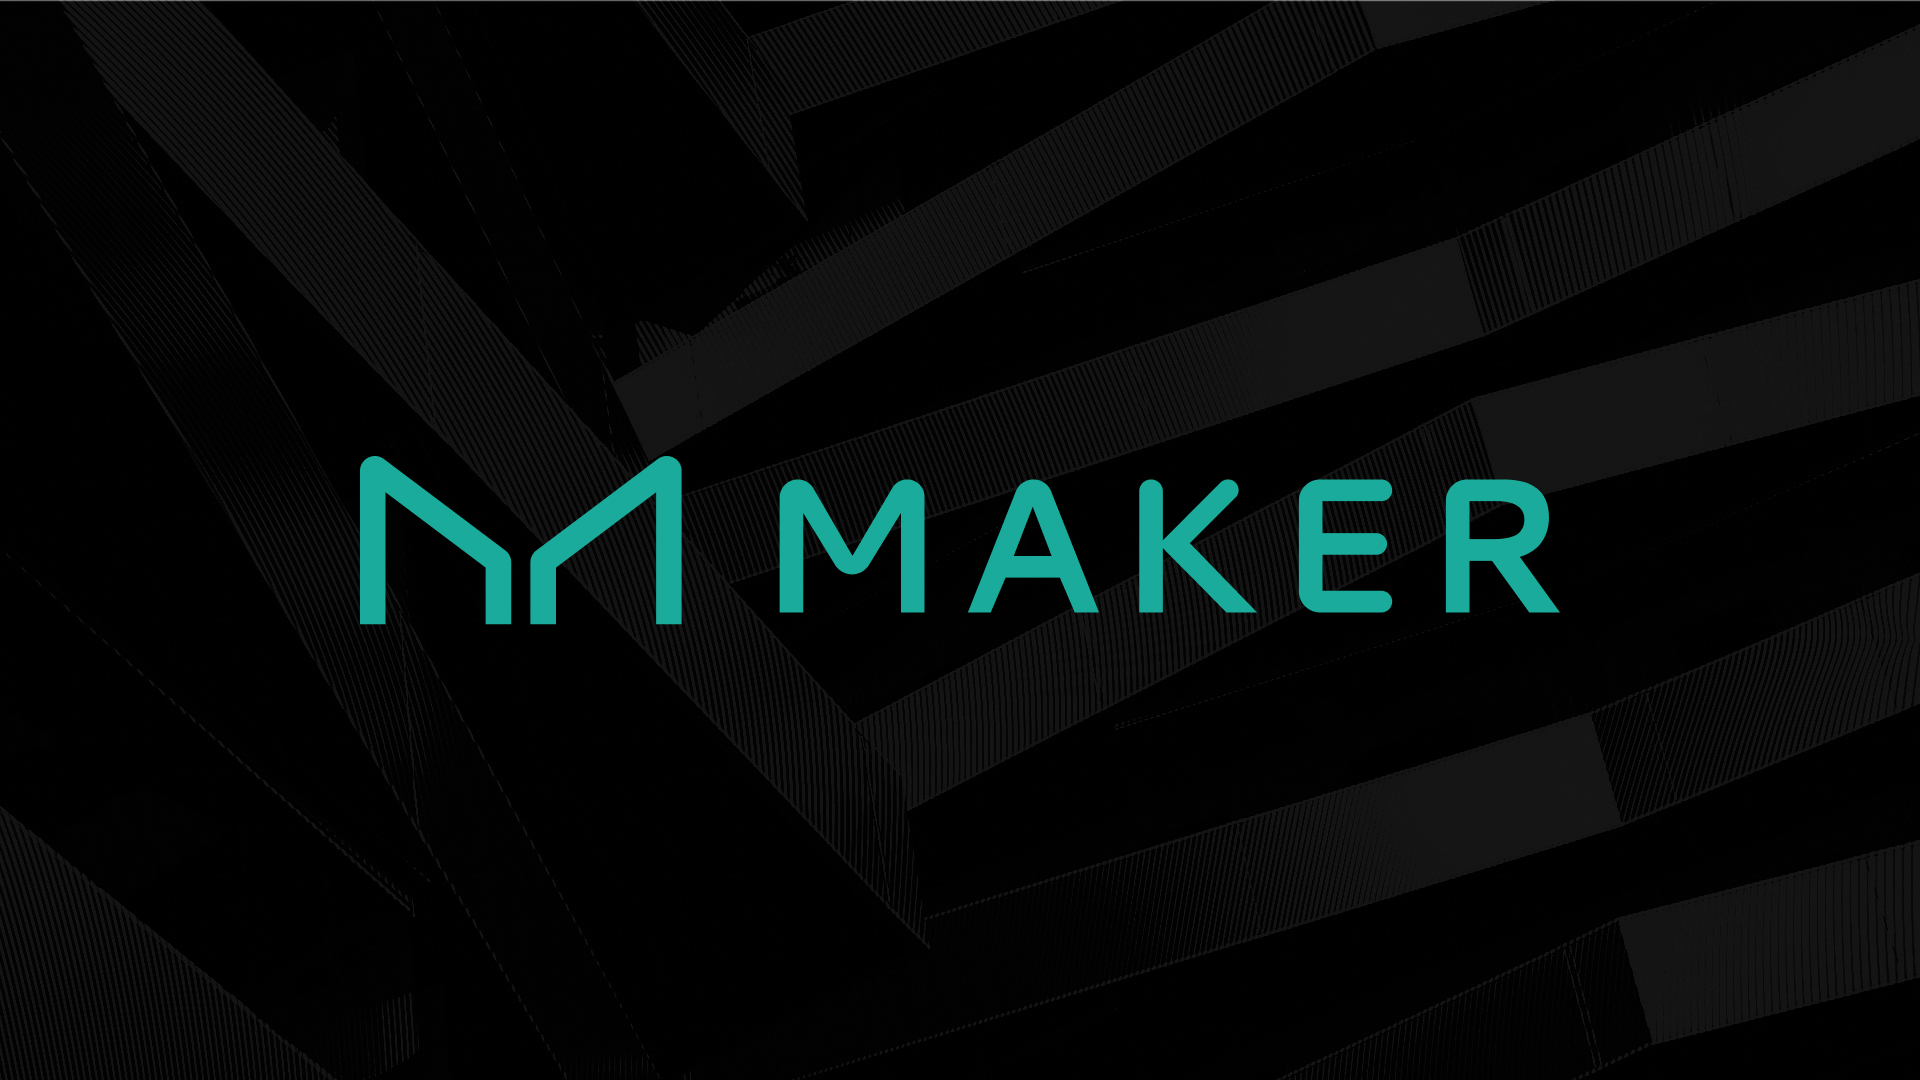 MakerDAO Co-founder Proposes Anonymity For Delegates